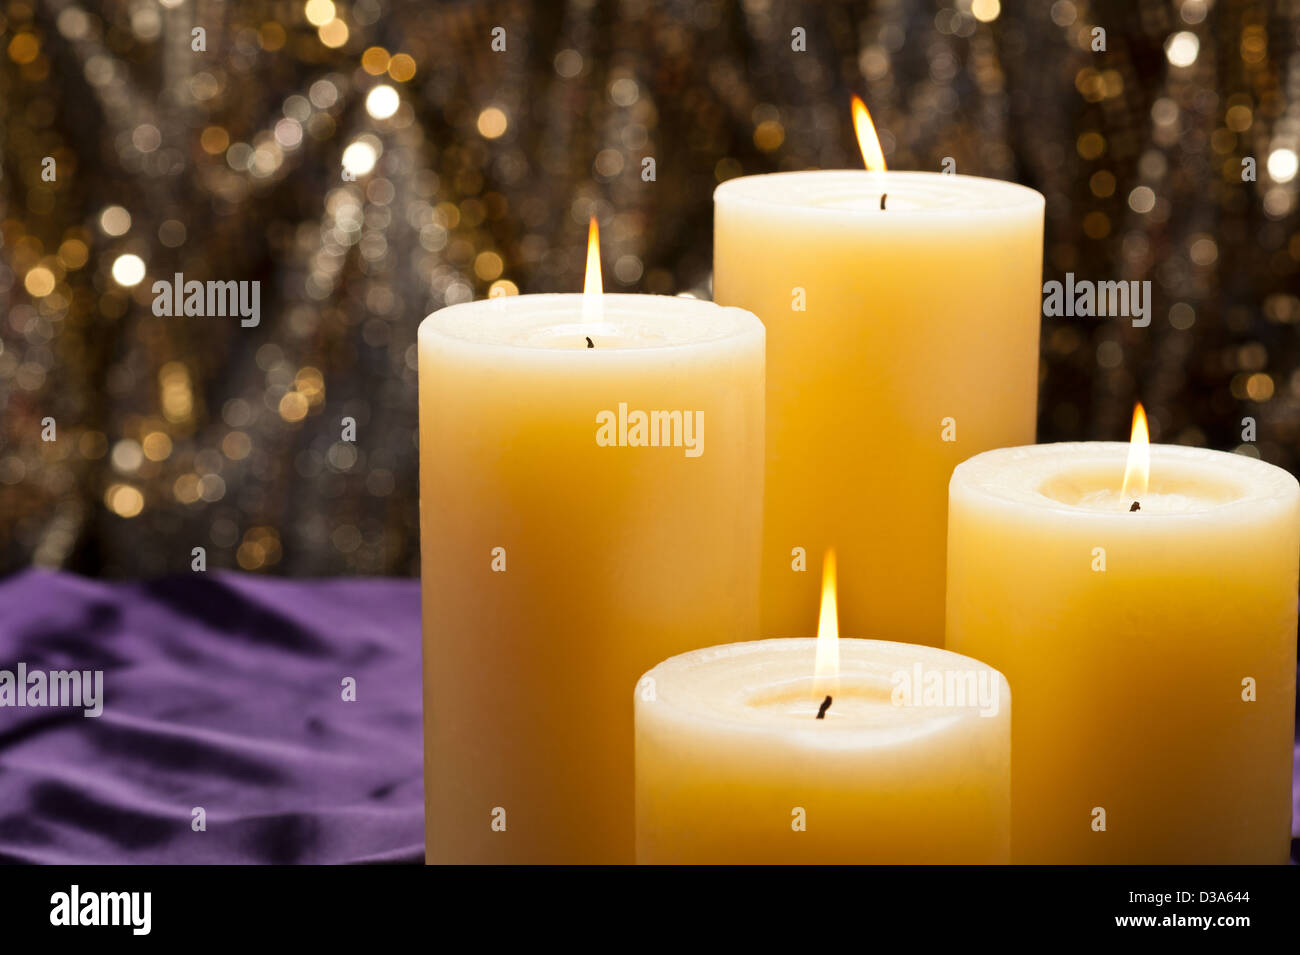 Four candles over purple velvet, with gold glitter background Stock Photo